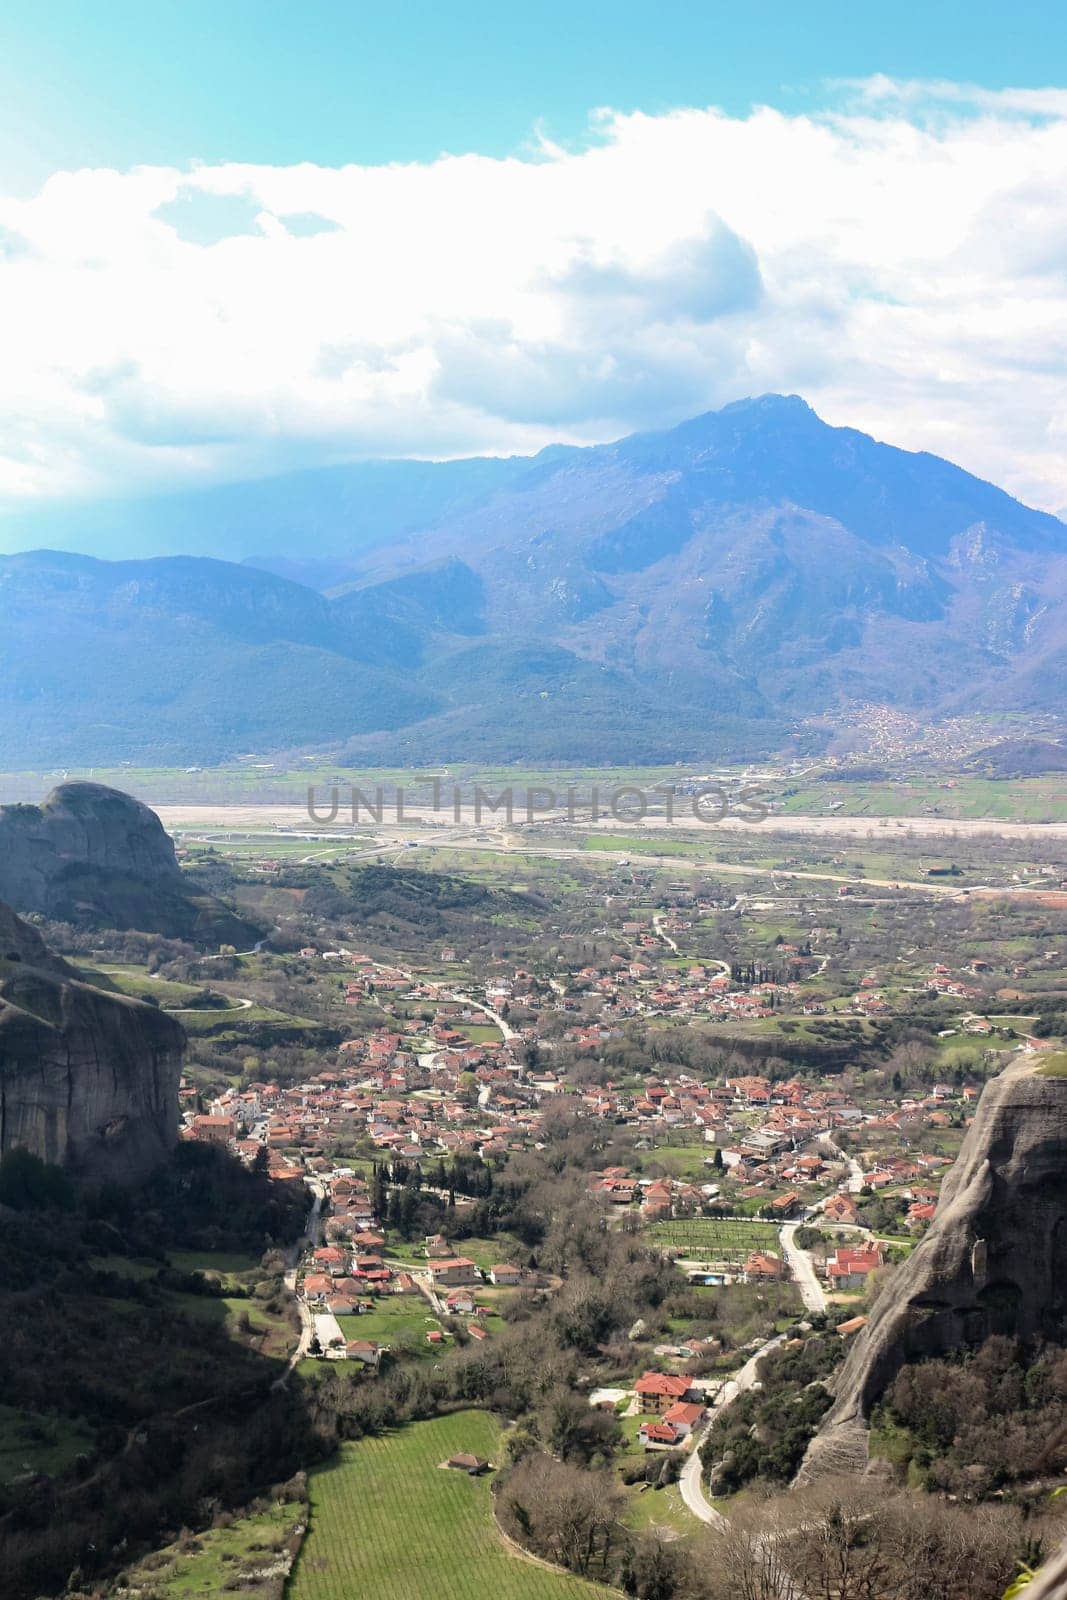 Immerse yourself in the panoramic beauty of Kalambaka, Greece, as seen from the timeless vantage point of the monasteries perched atop the towering cliffs of Meteora